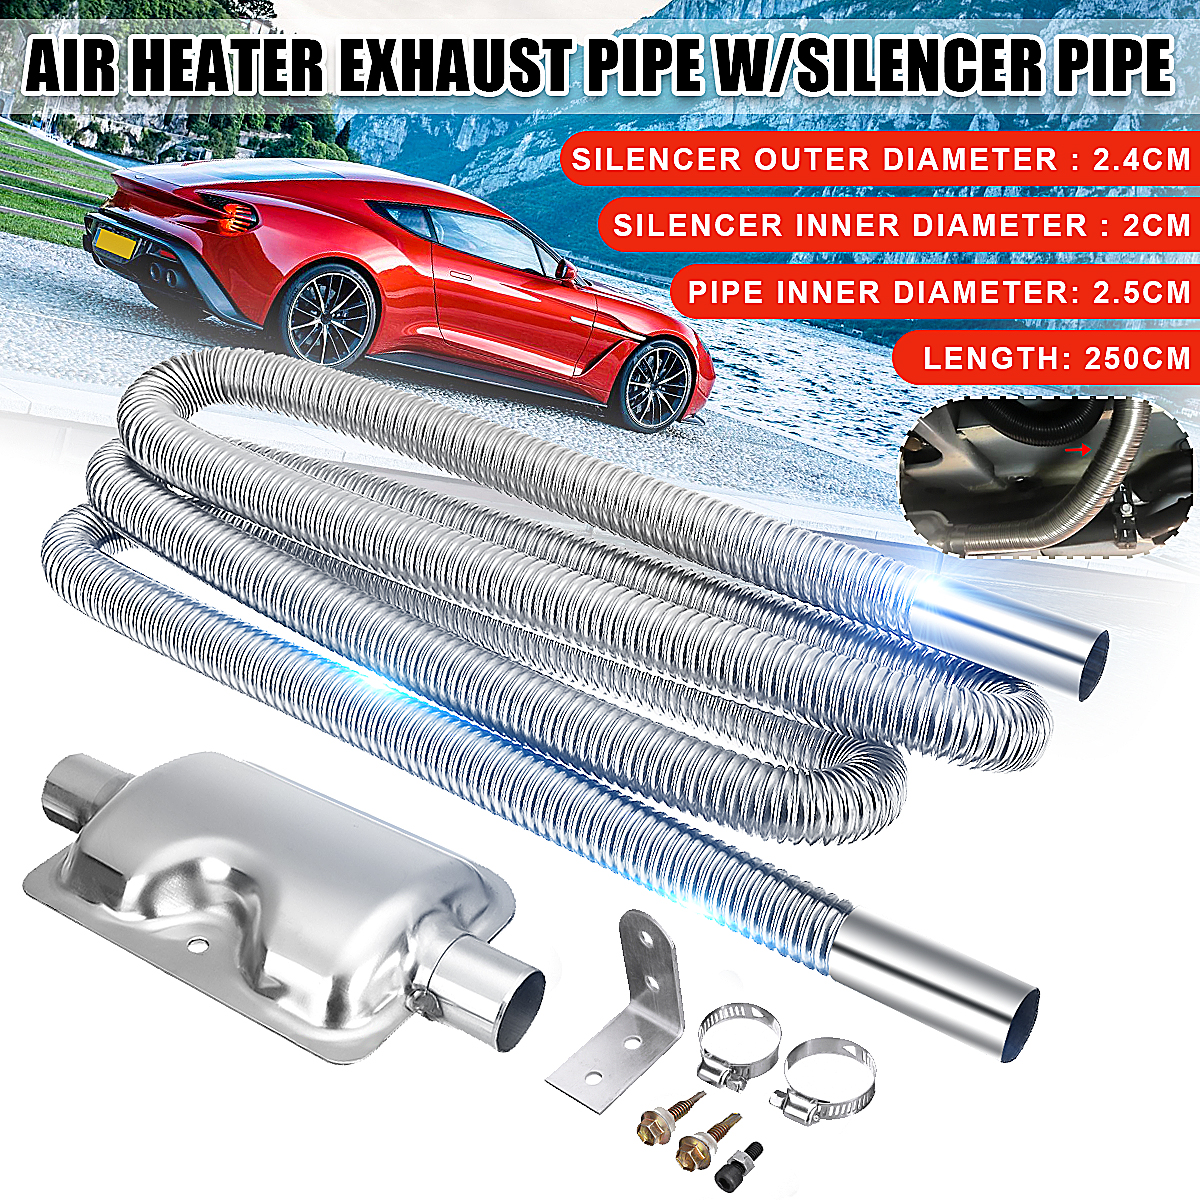 250cm Stainless Steel Exhaust Pipe W/Silencer For Parking Air Diesel Heater